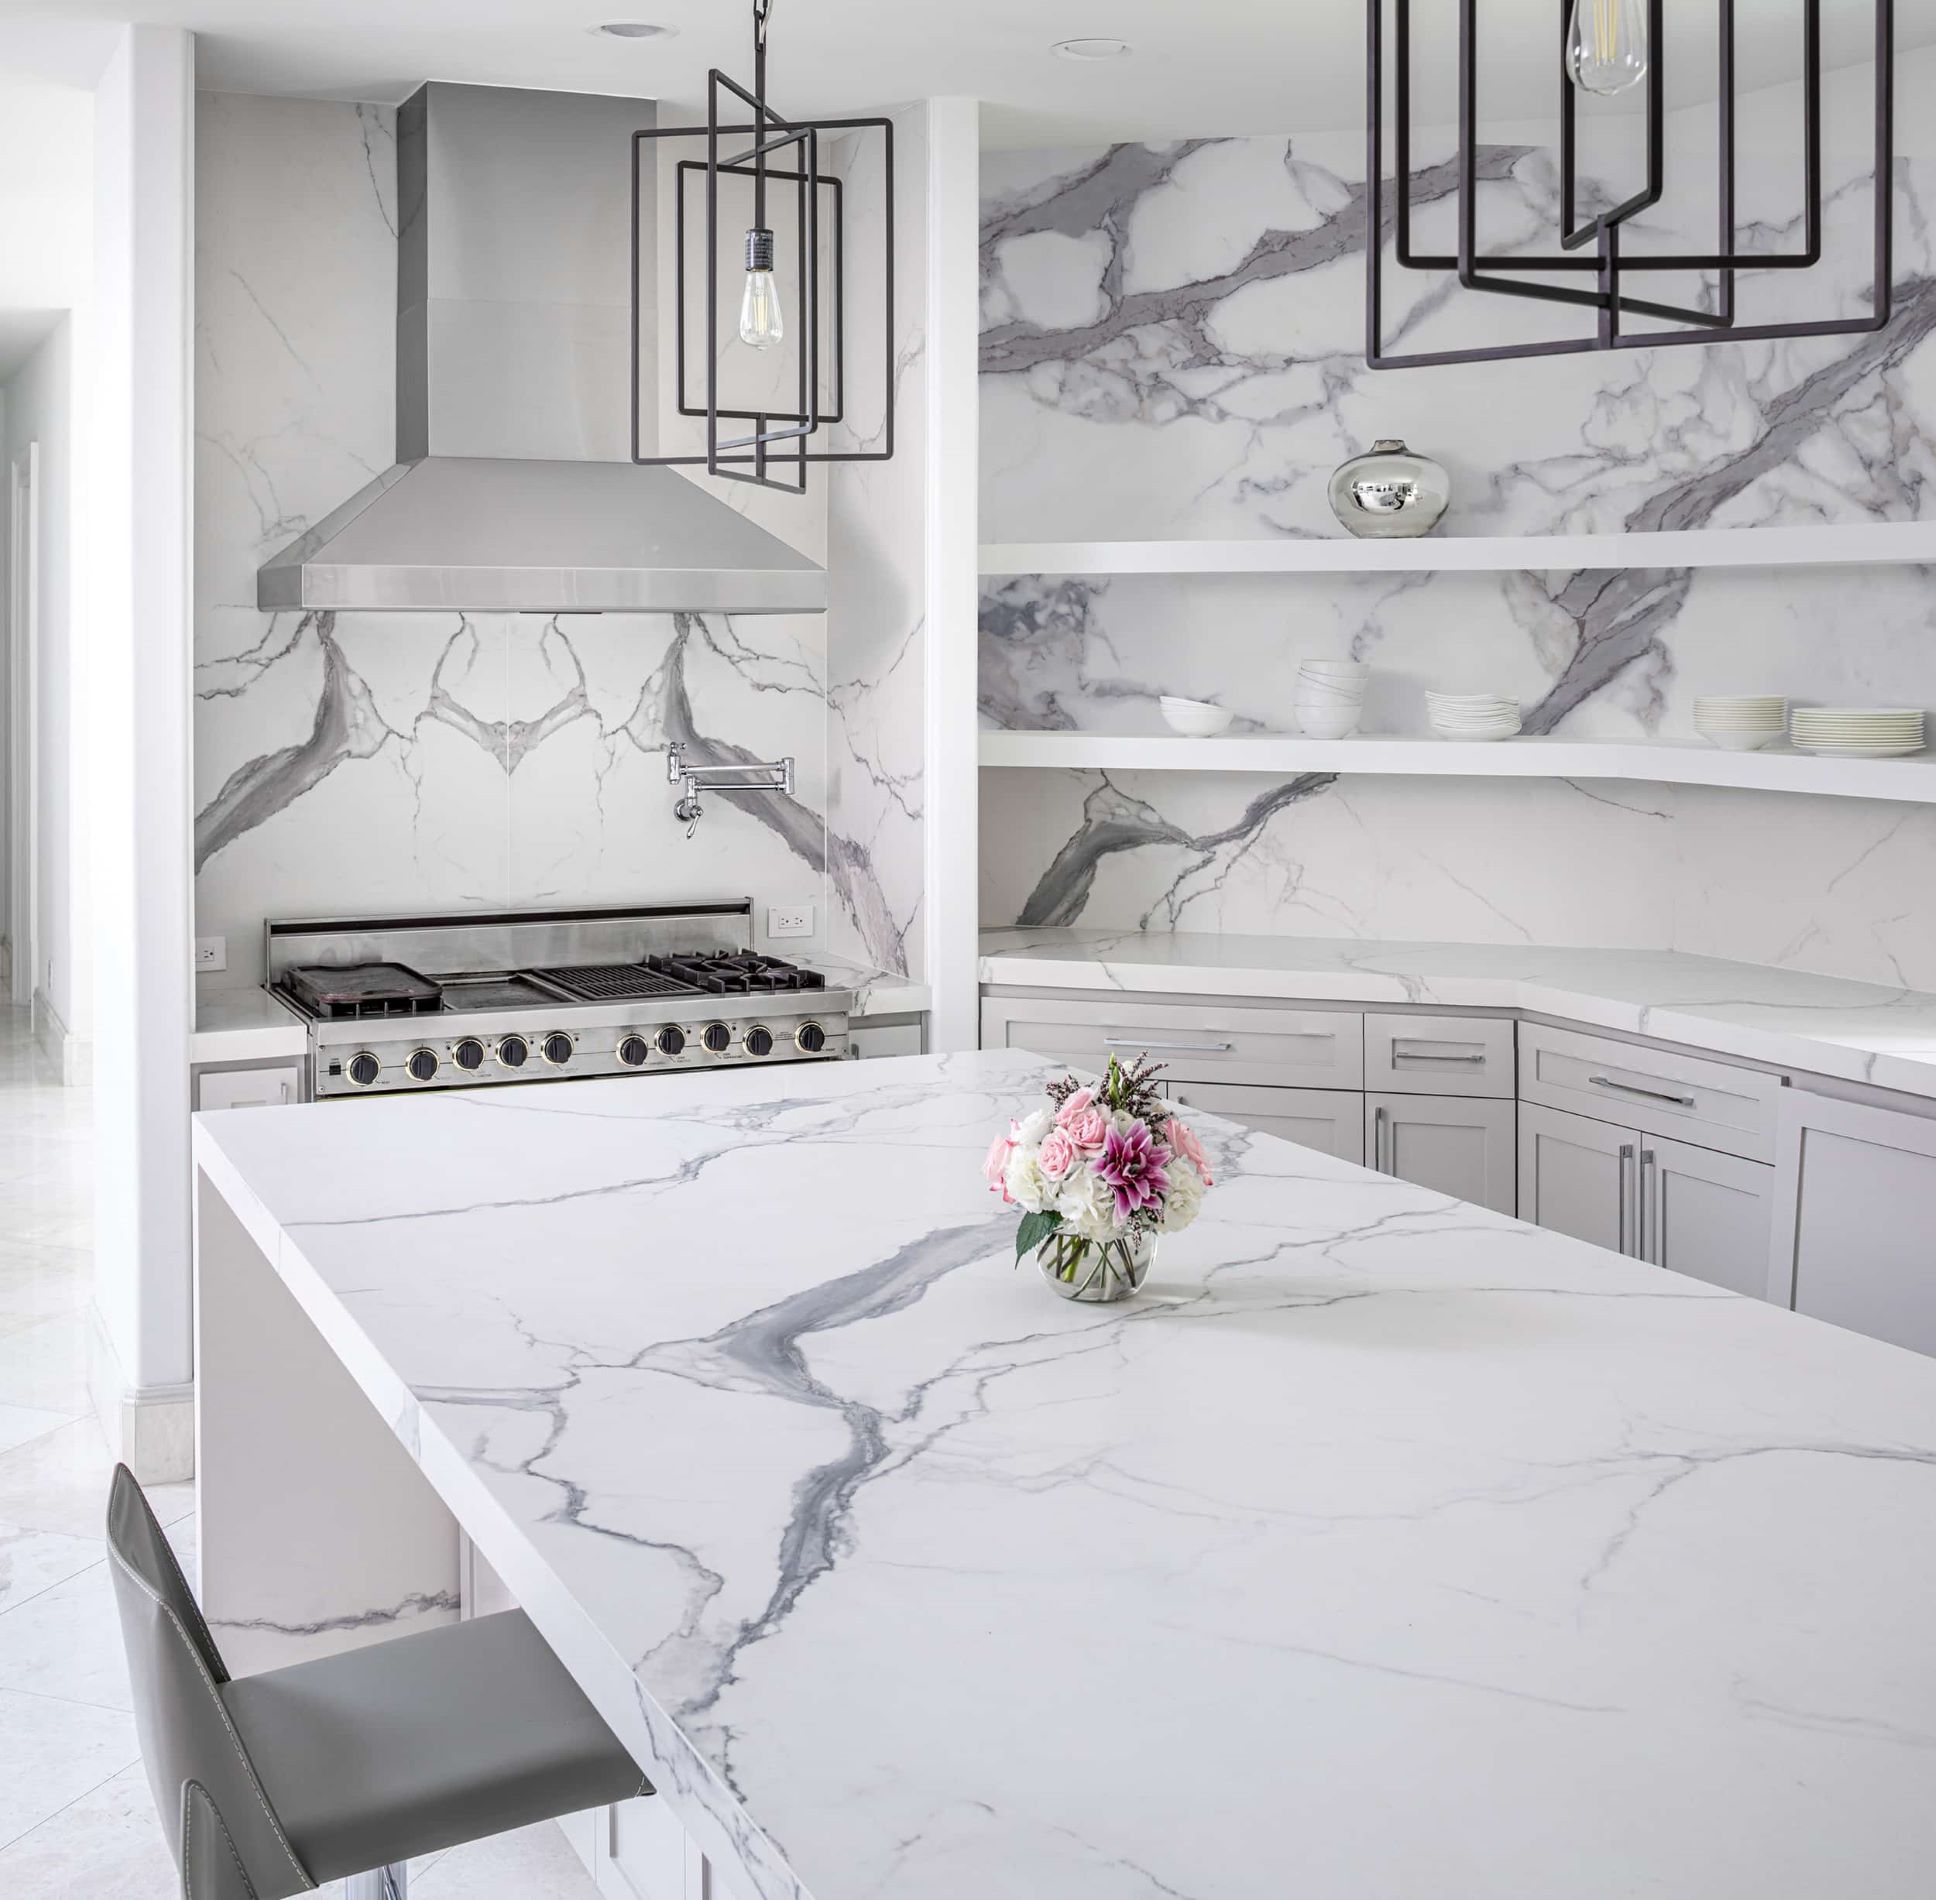 How Much Are Porcelain Countertops